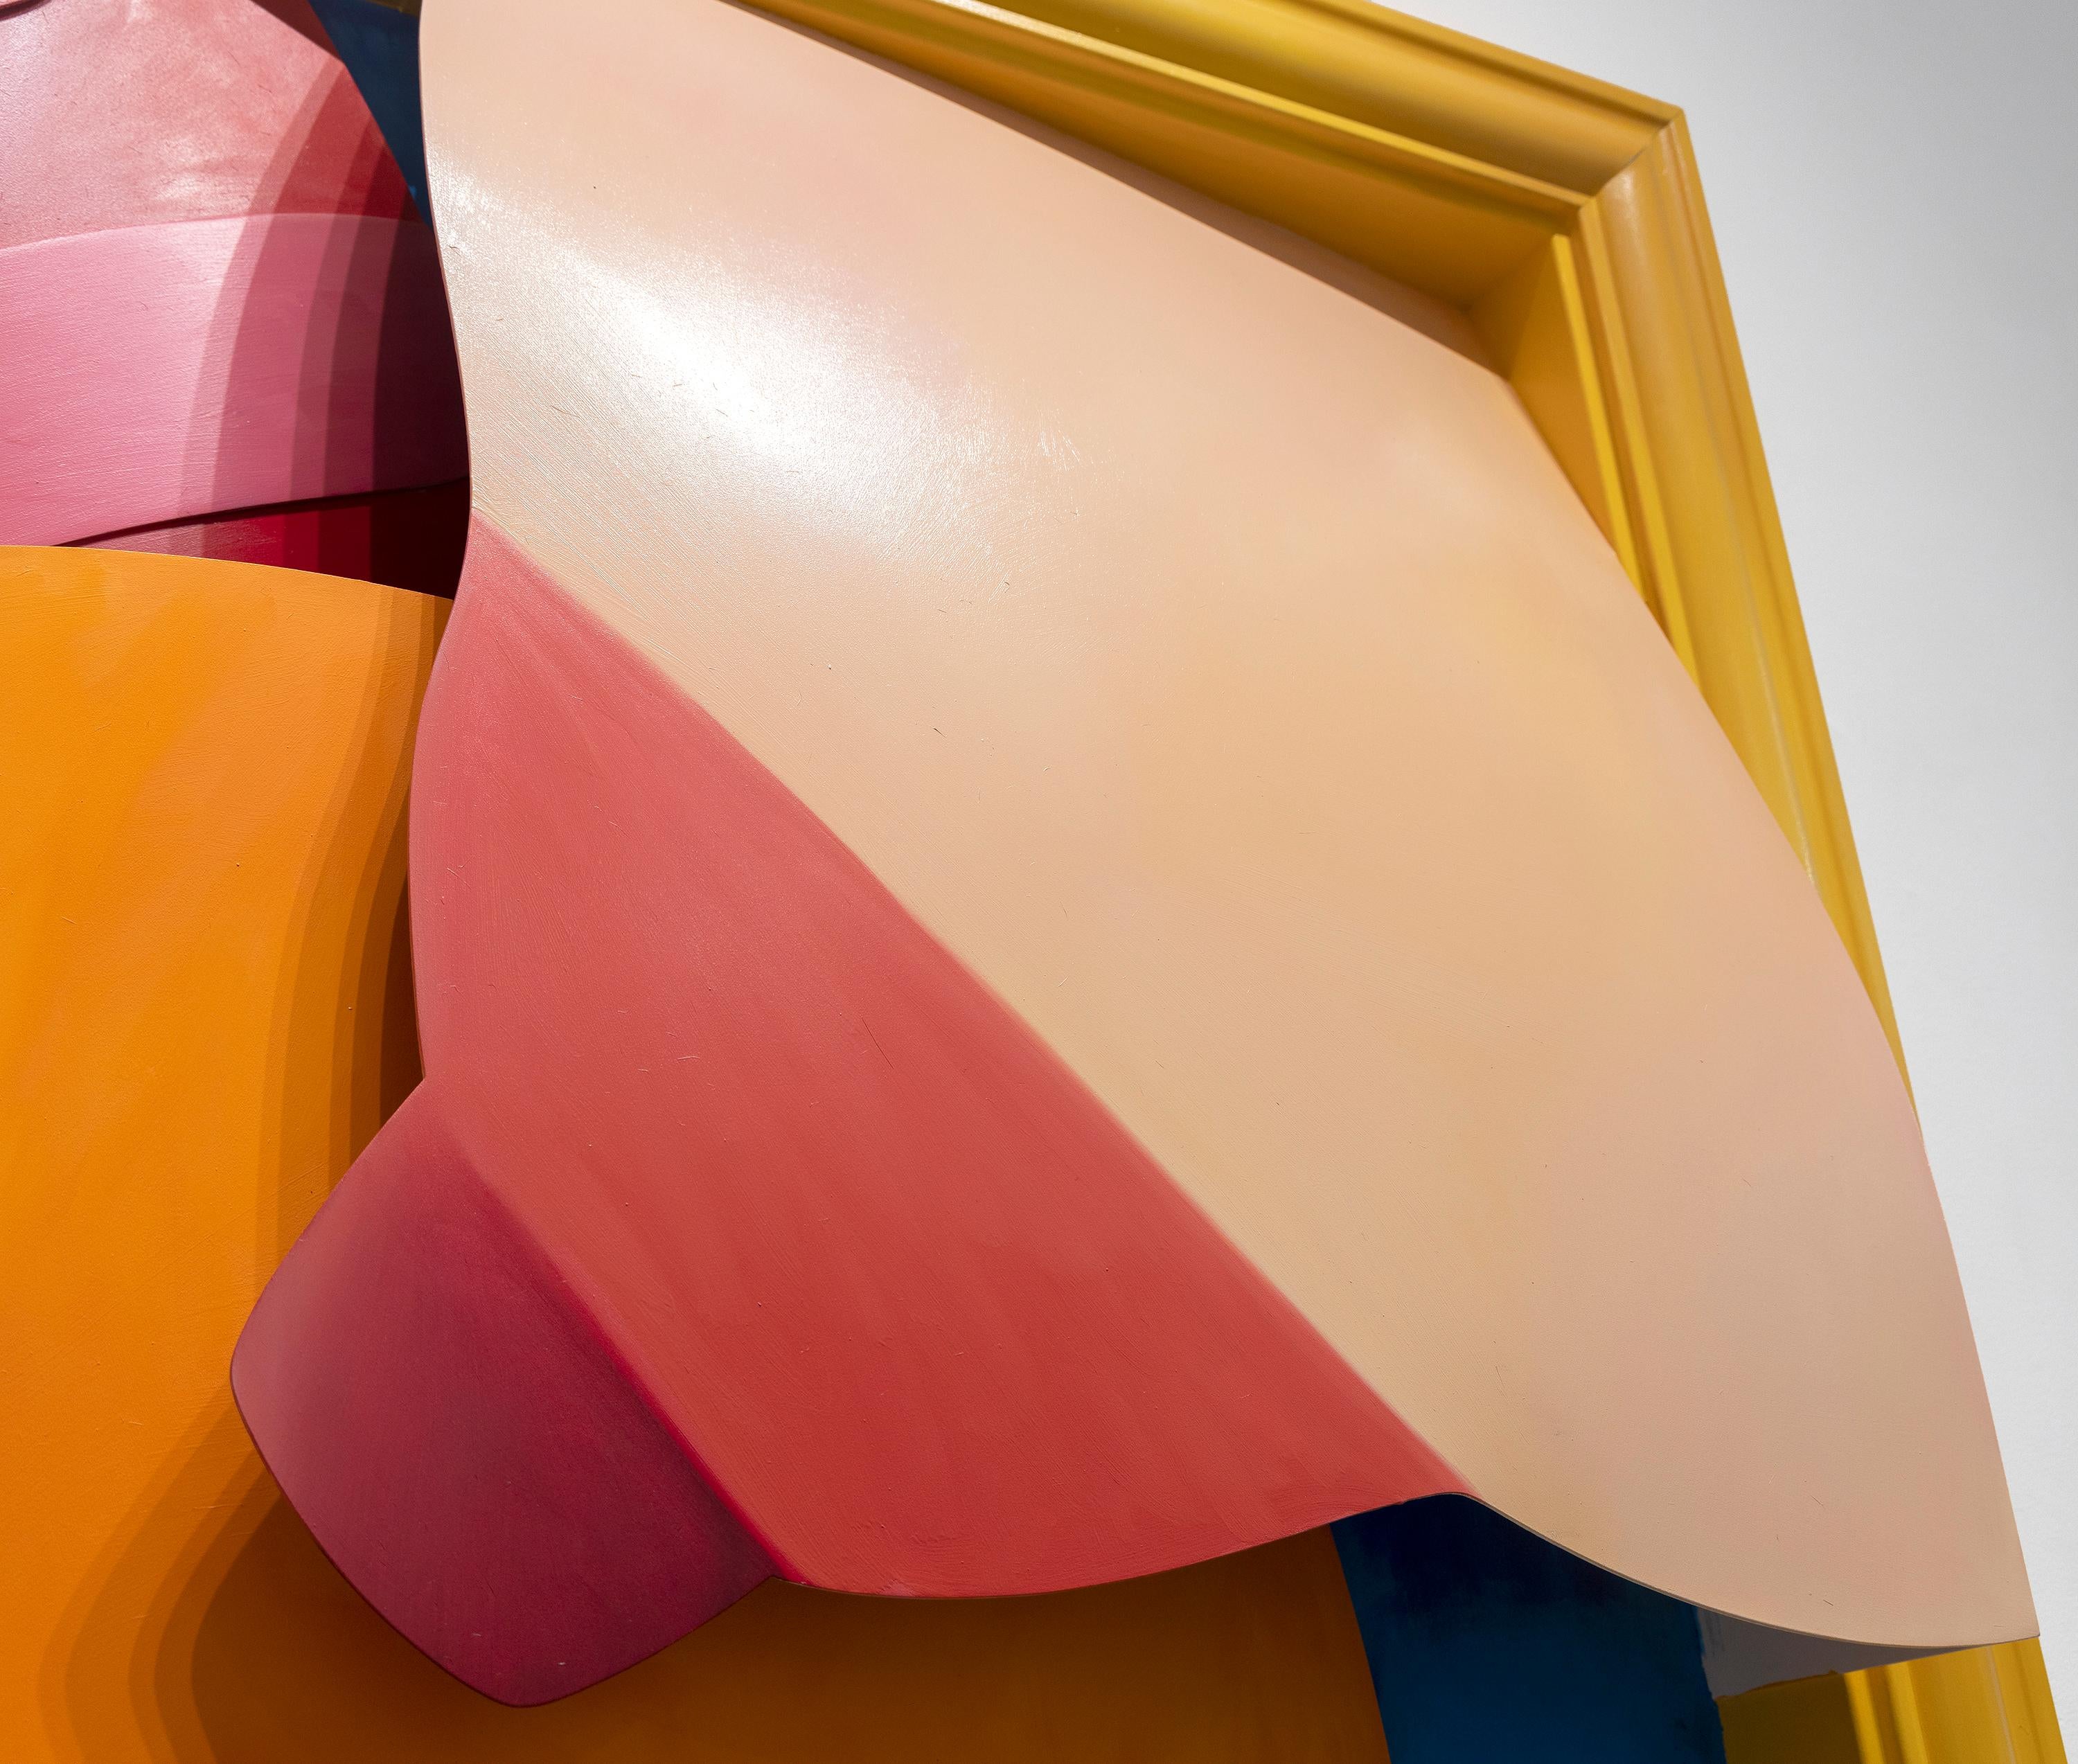 A painting by Tom Wesselmann. 